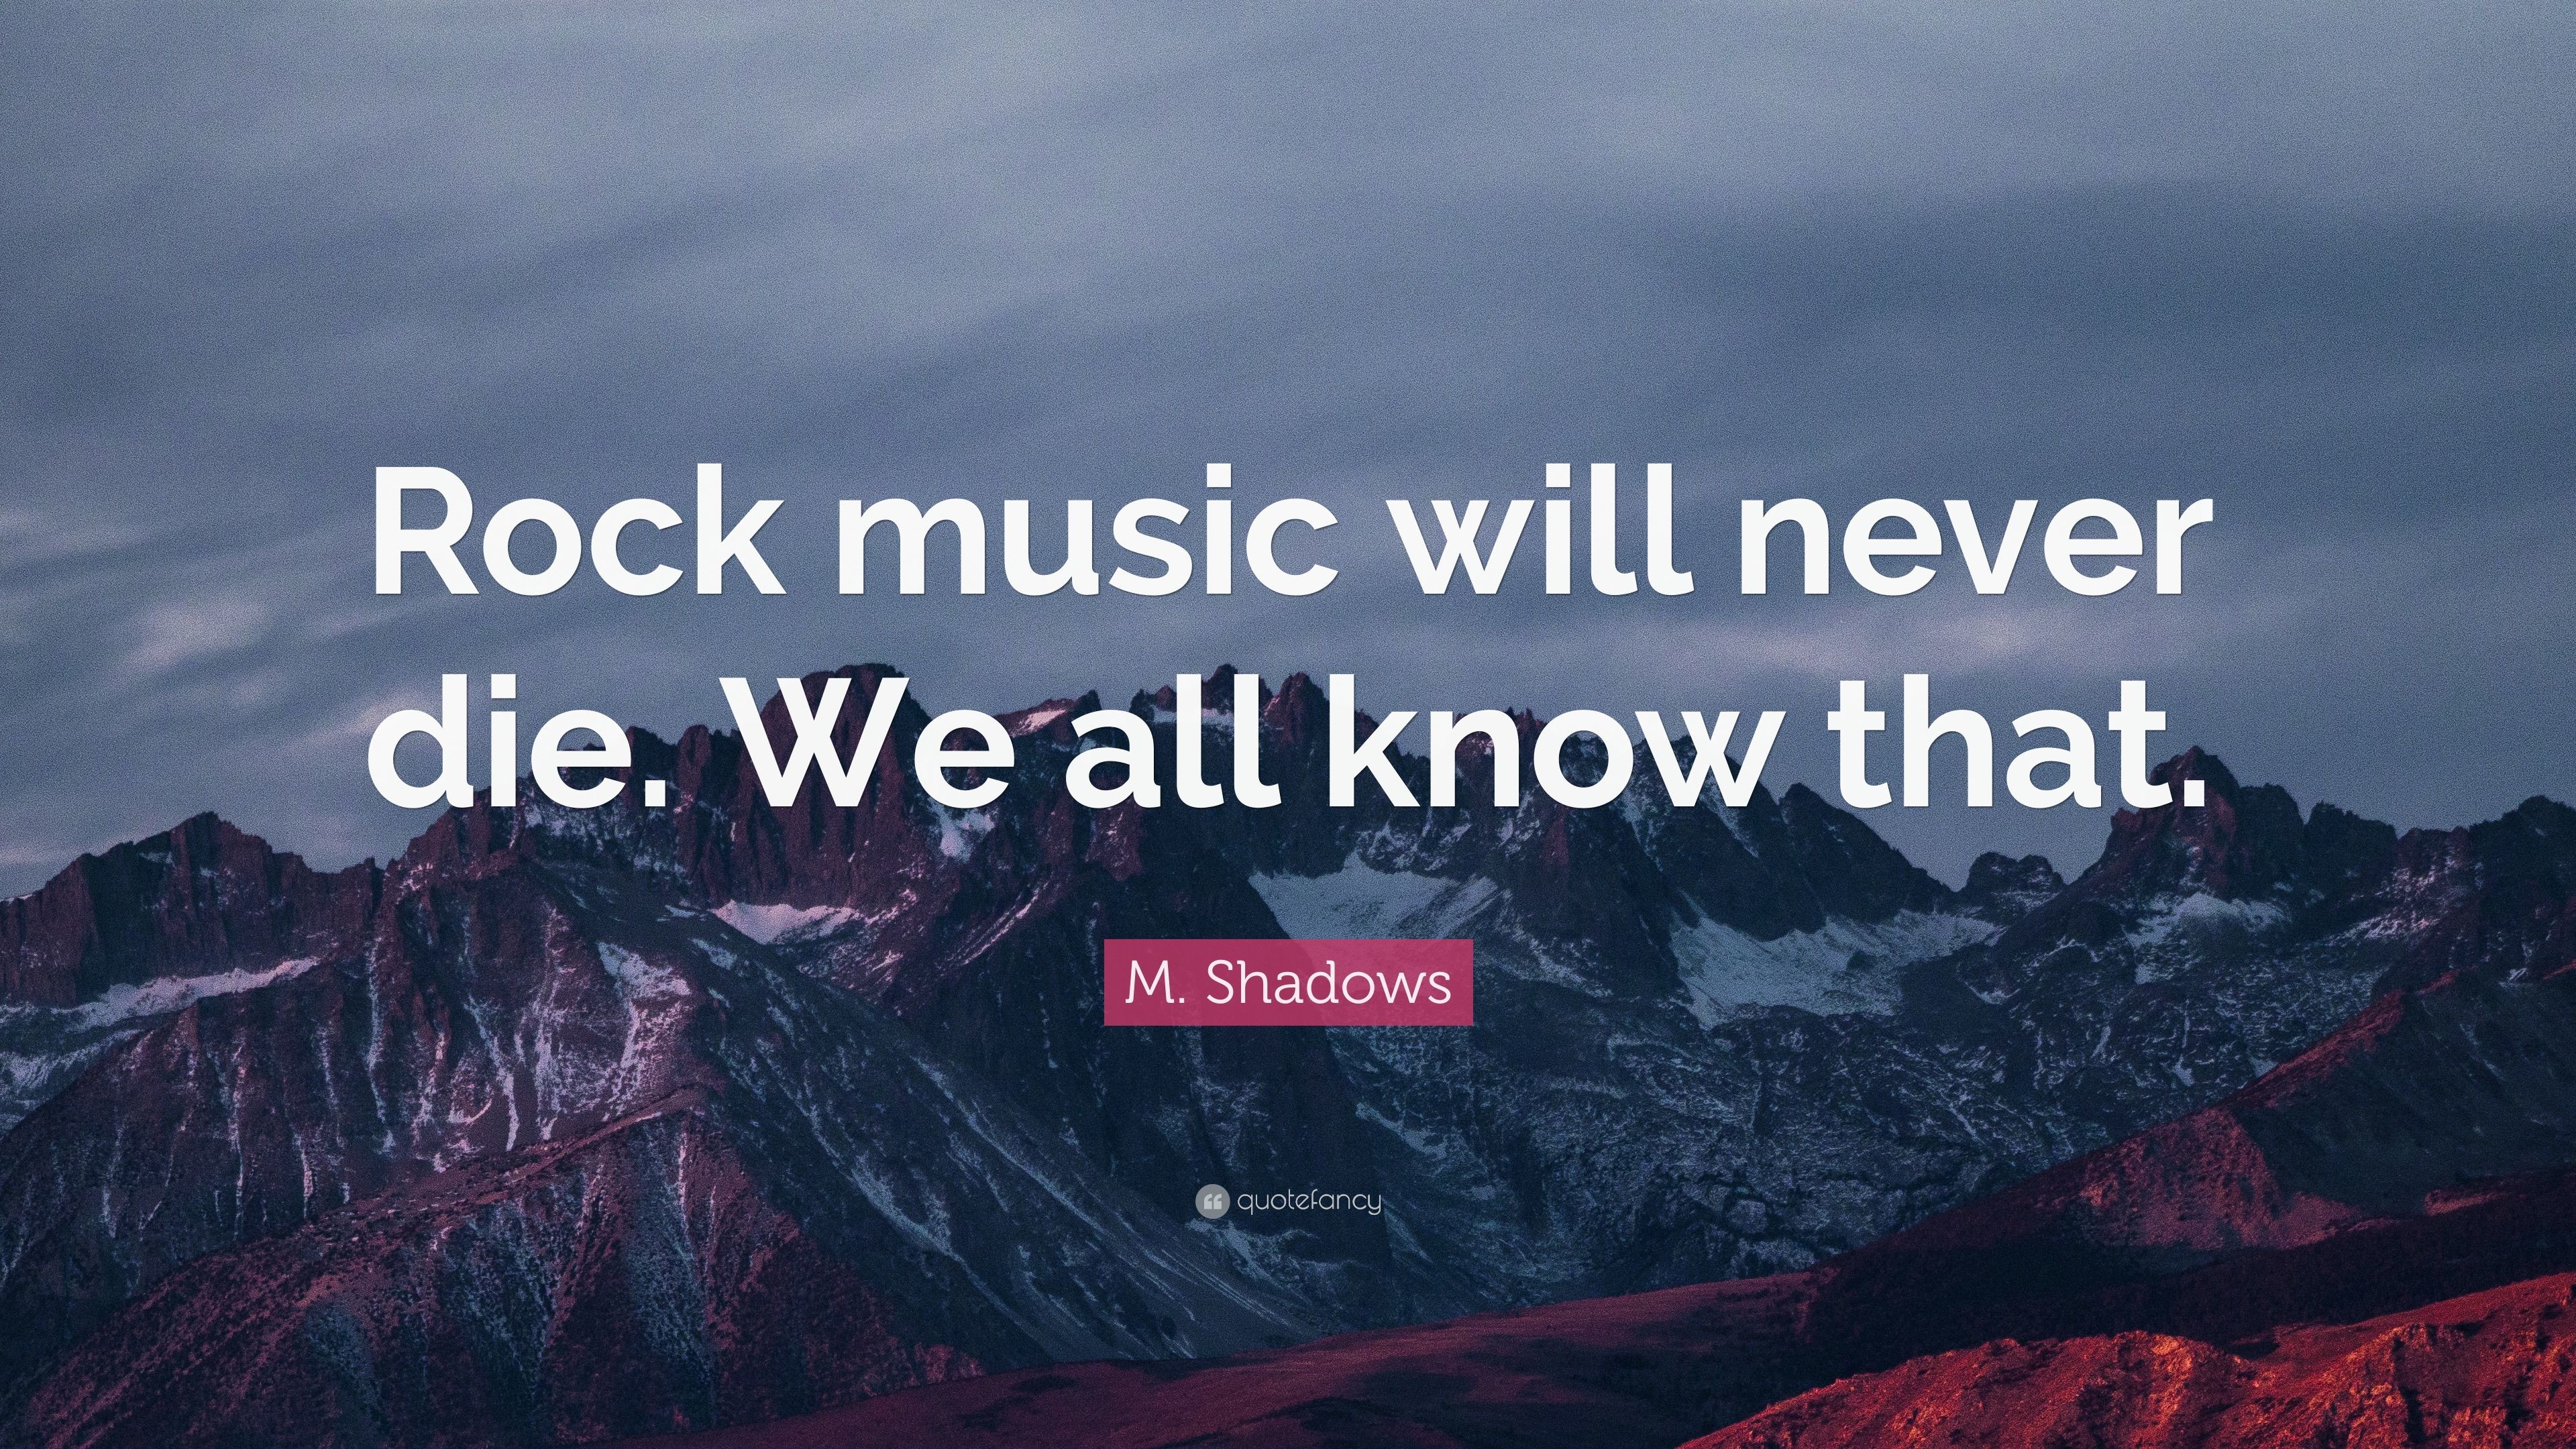 3840x2160 M. Shadows Quote: “Rock music will never die. We all know that